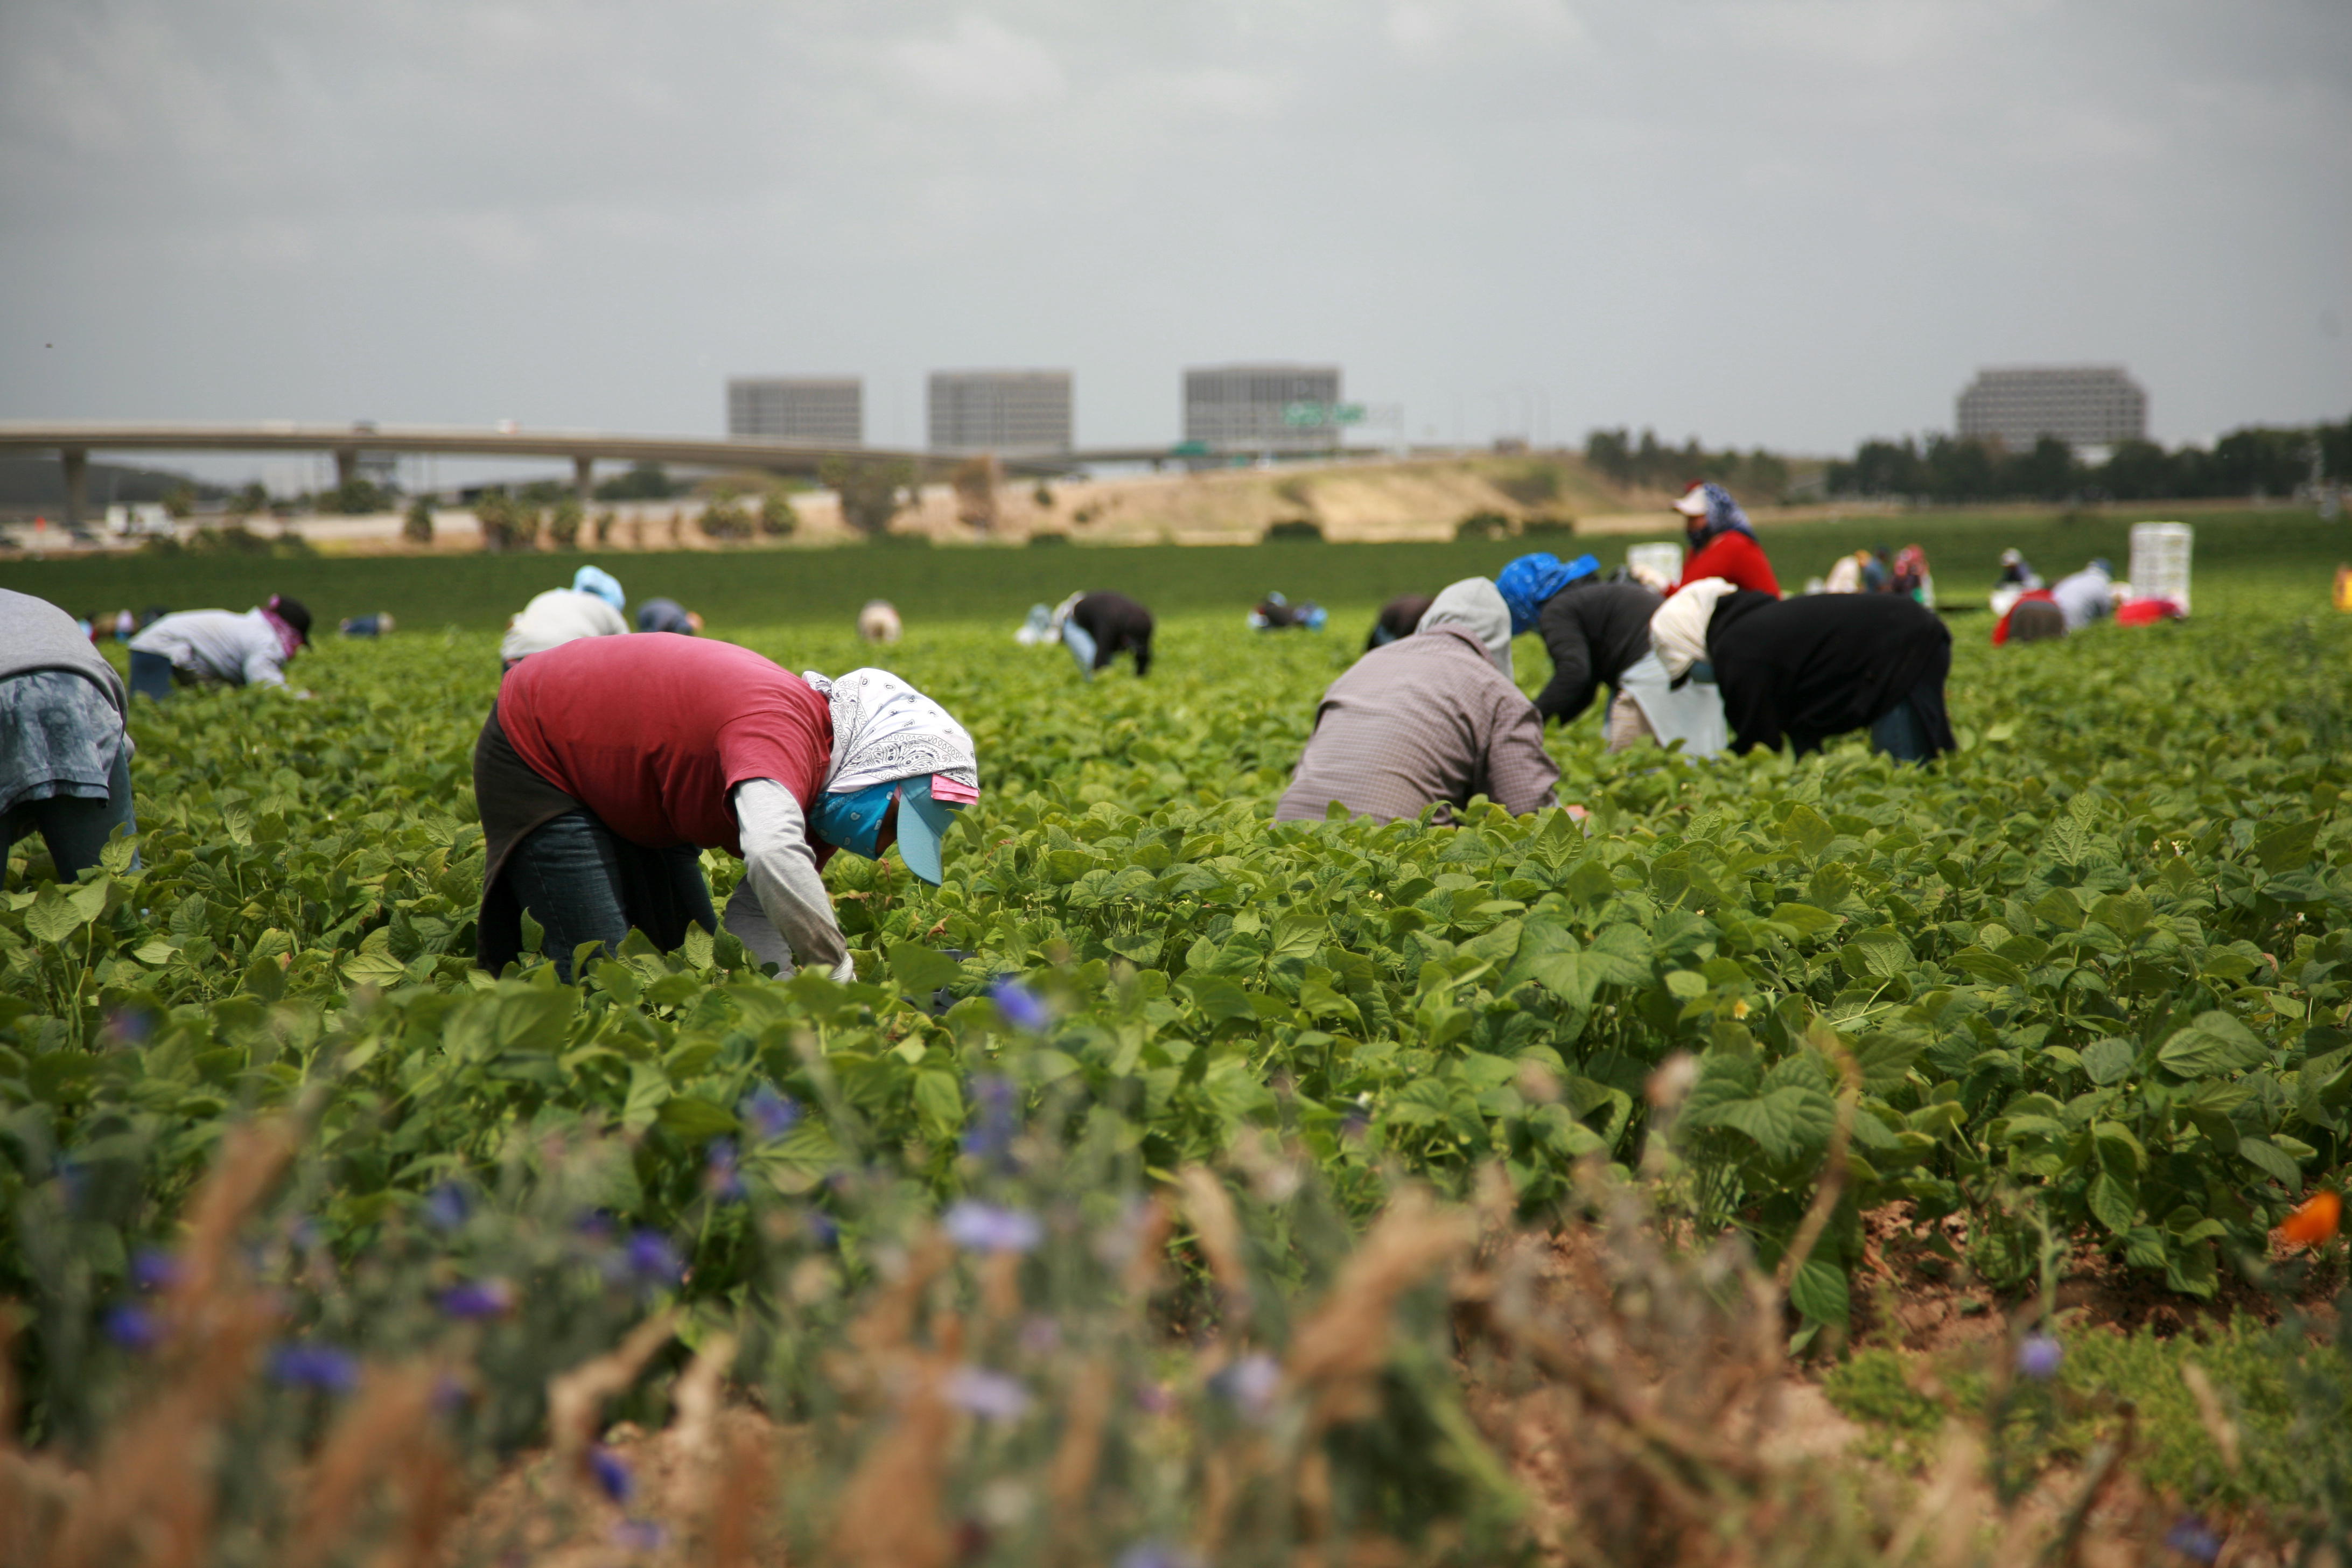 Immigrant migrant seasonal farm workers pick and package fruit and vegetables working in the fields